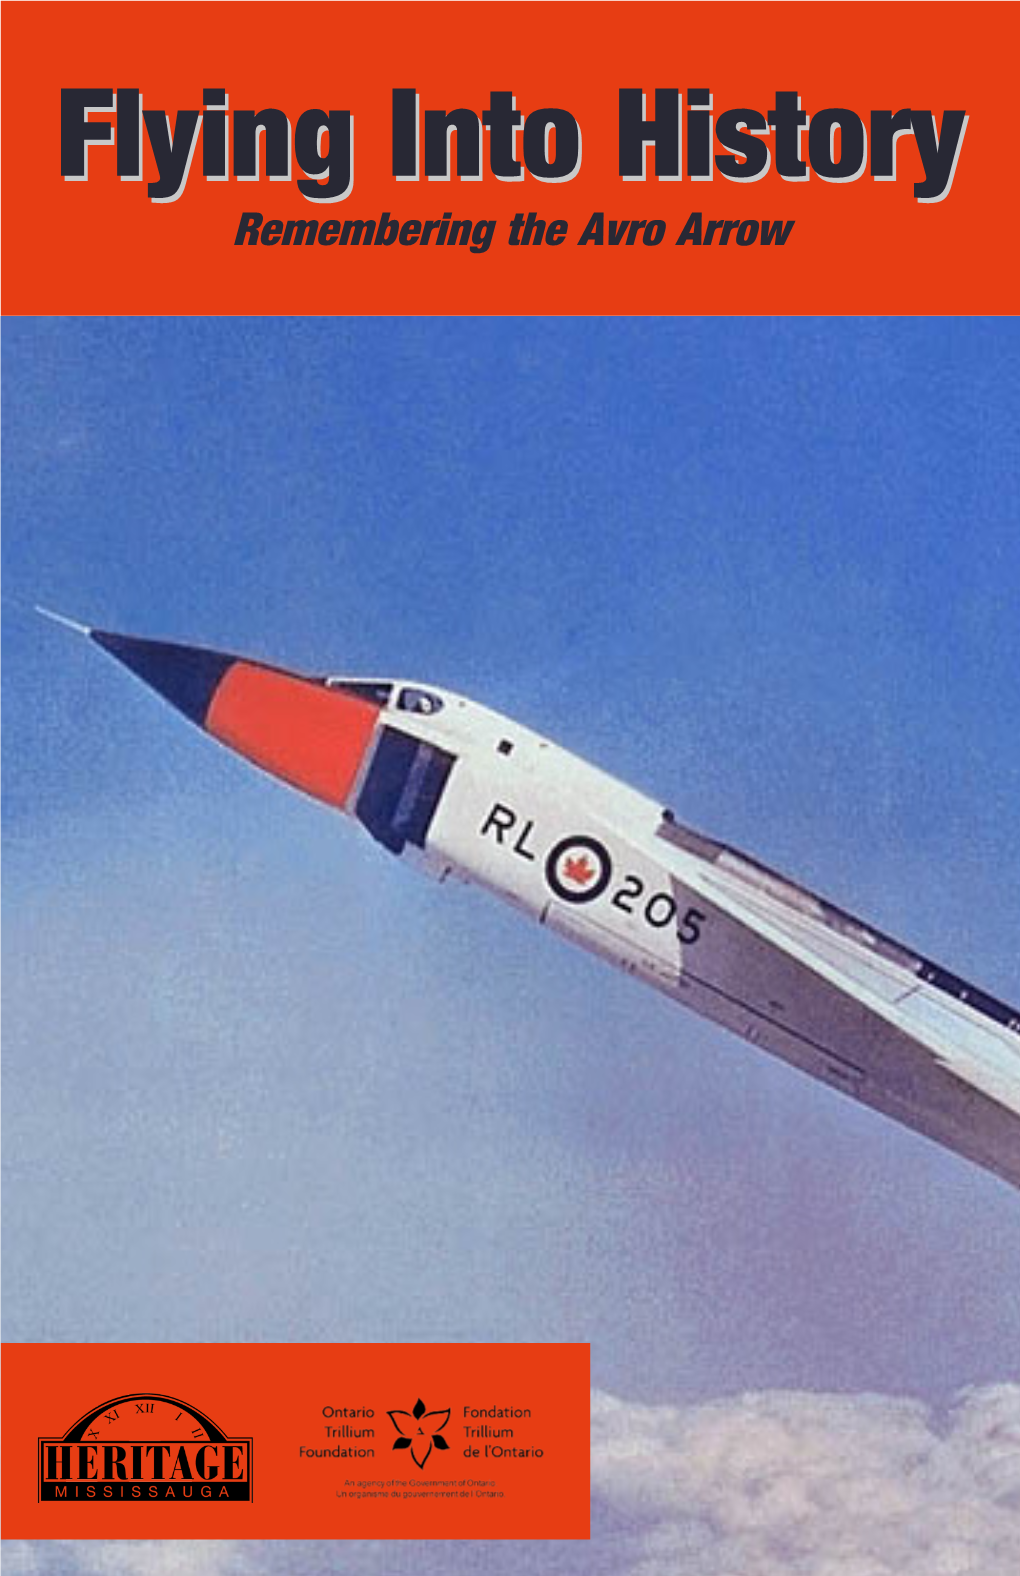 Remembering the Avro Arrow Overview